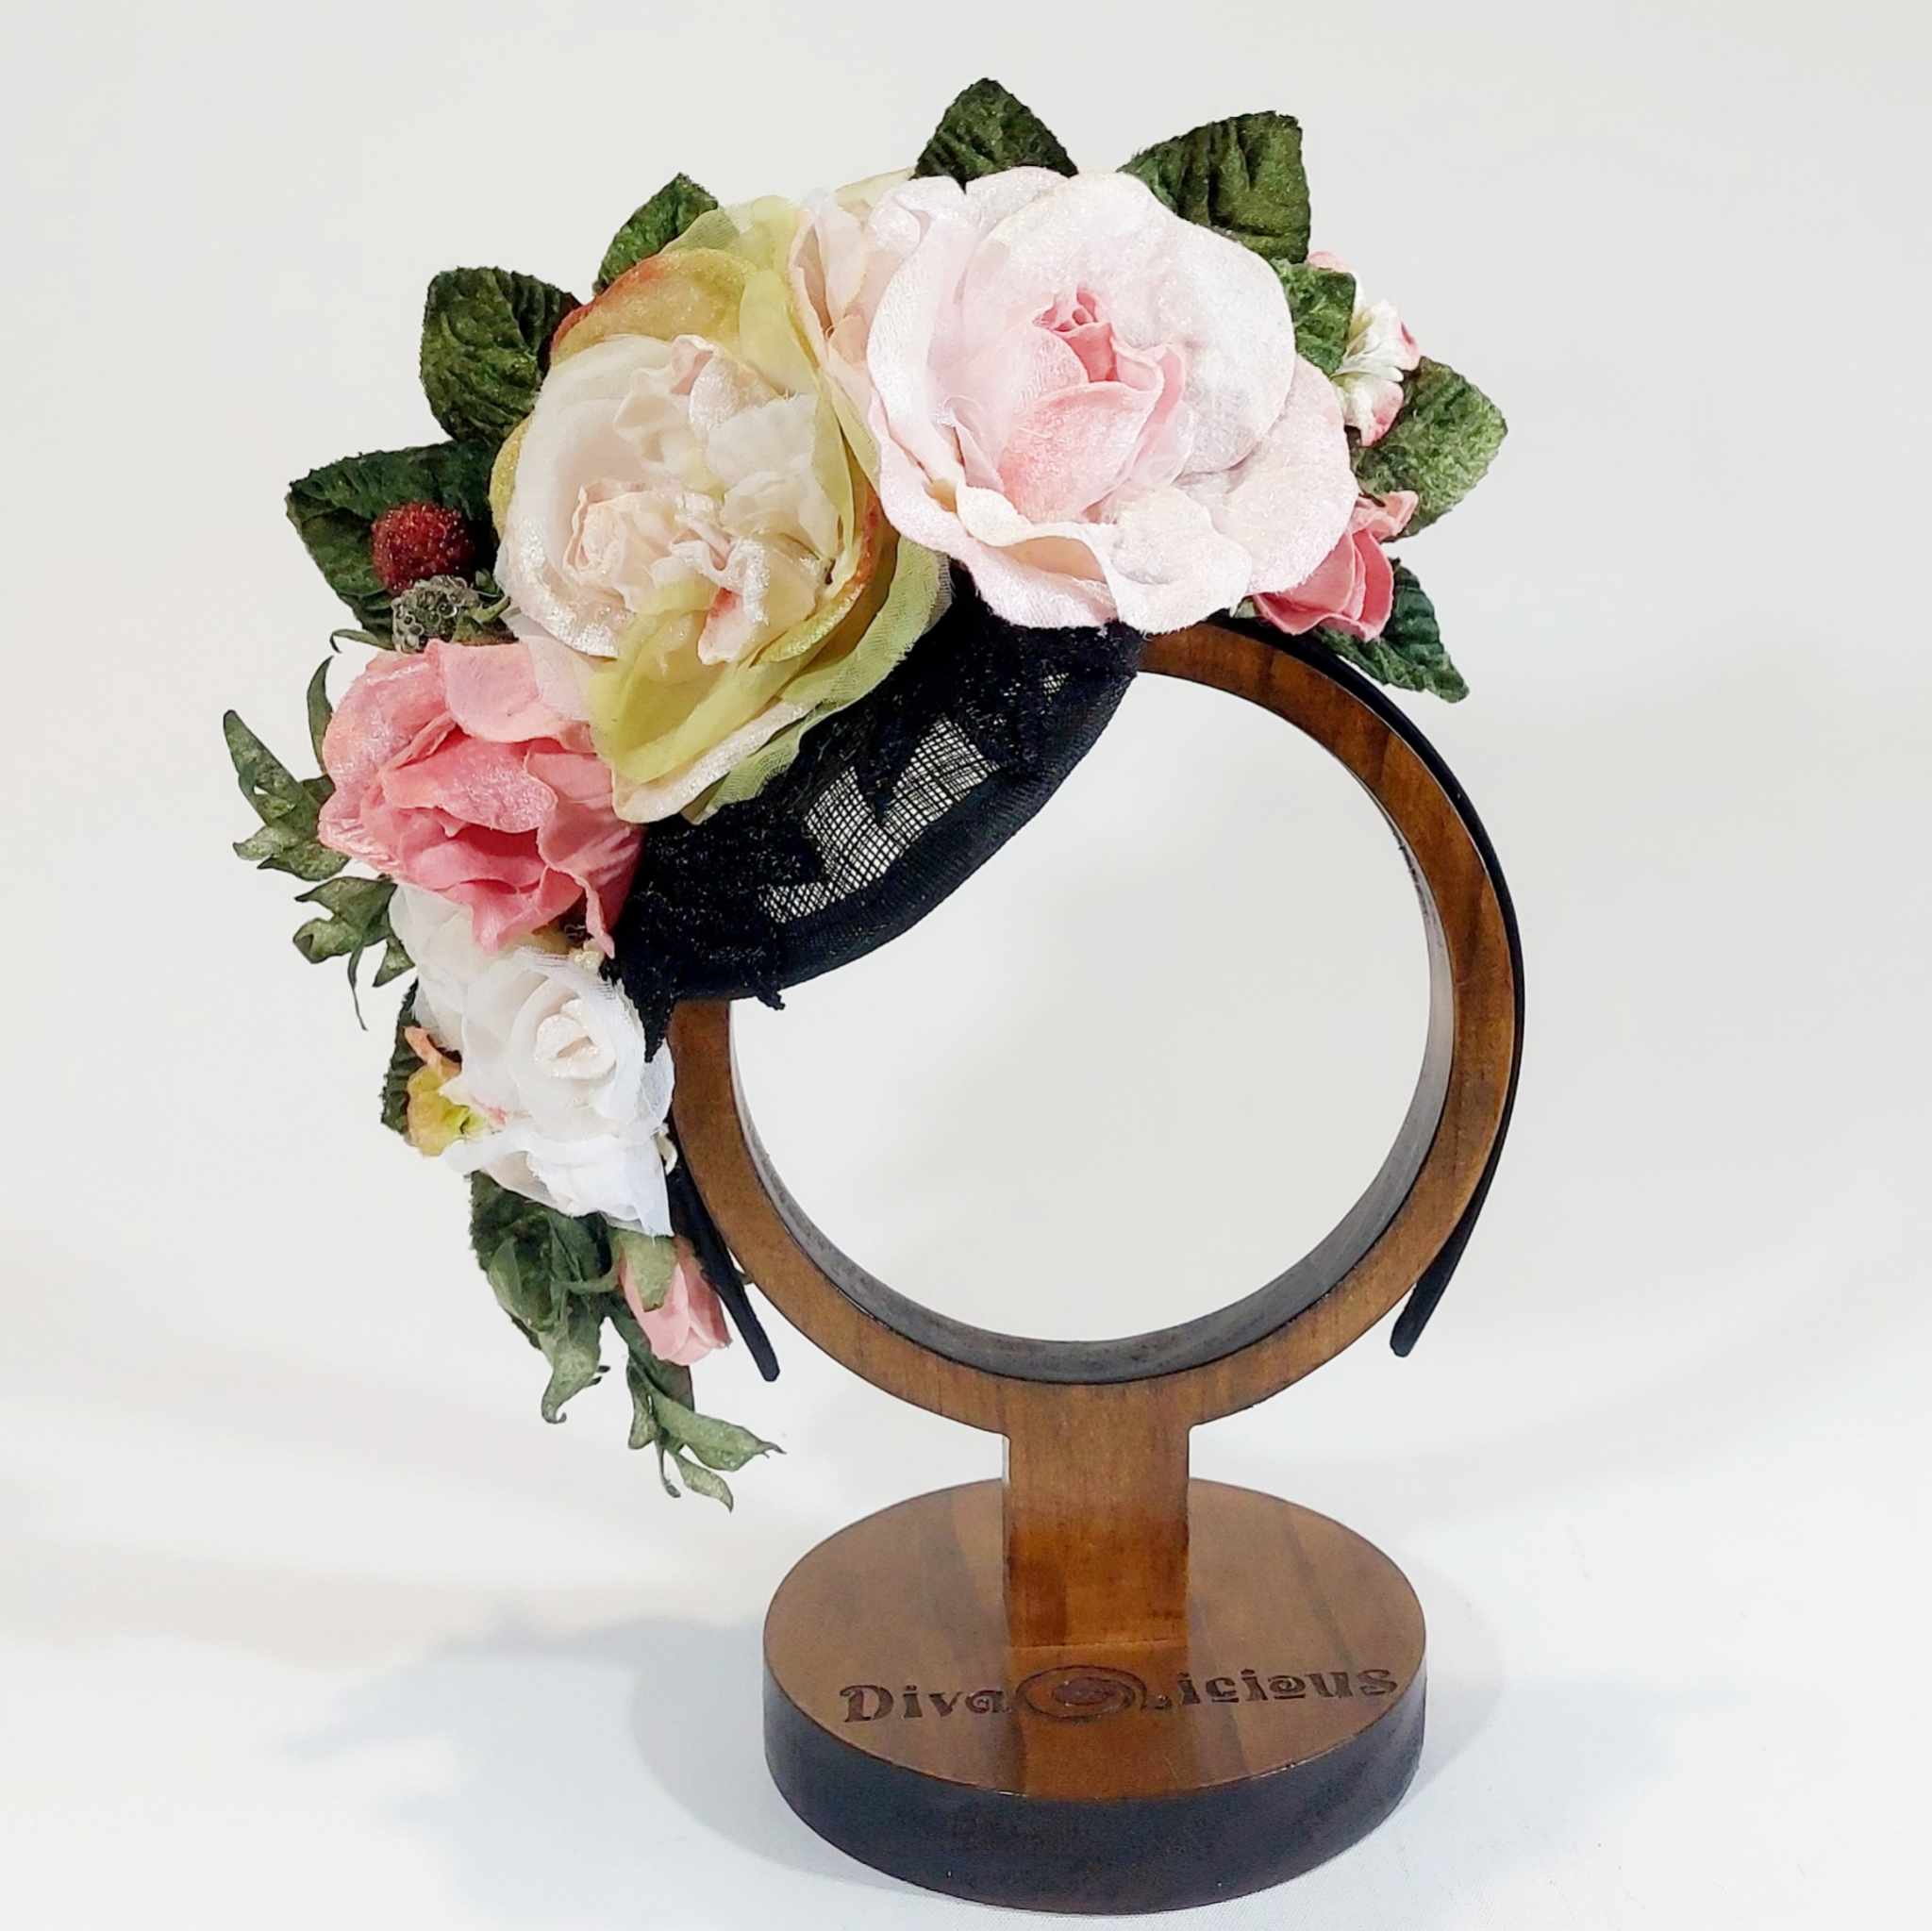 a gorgeous vintage style fascinator with velvet roses to wear to the races